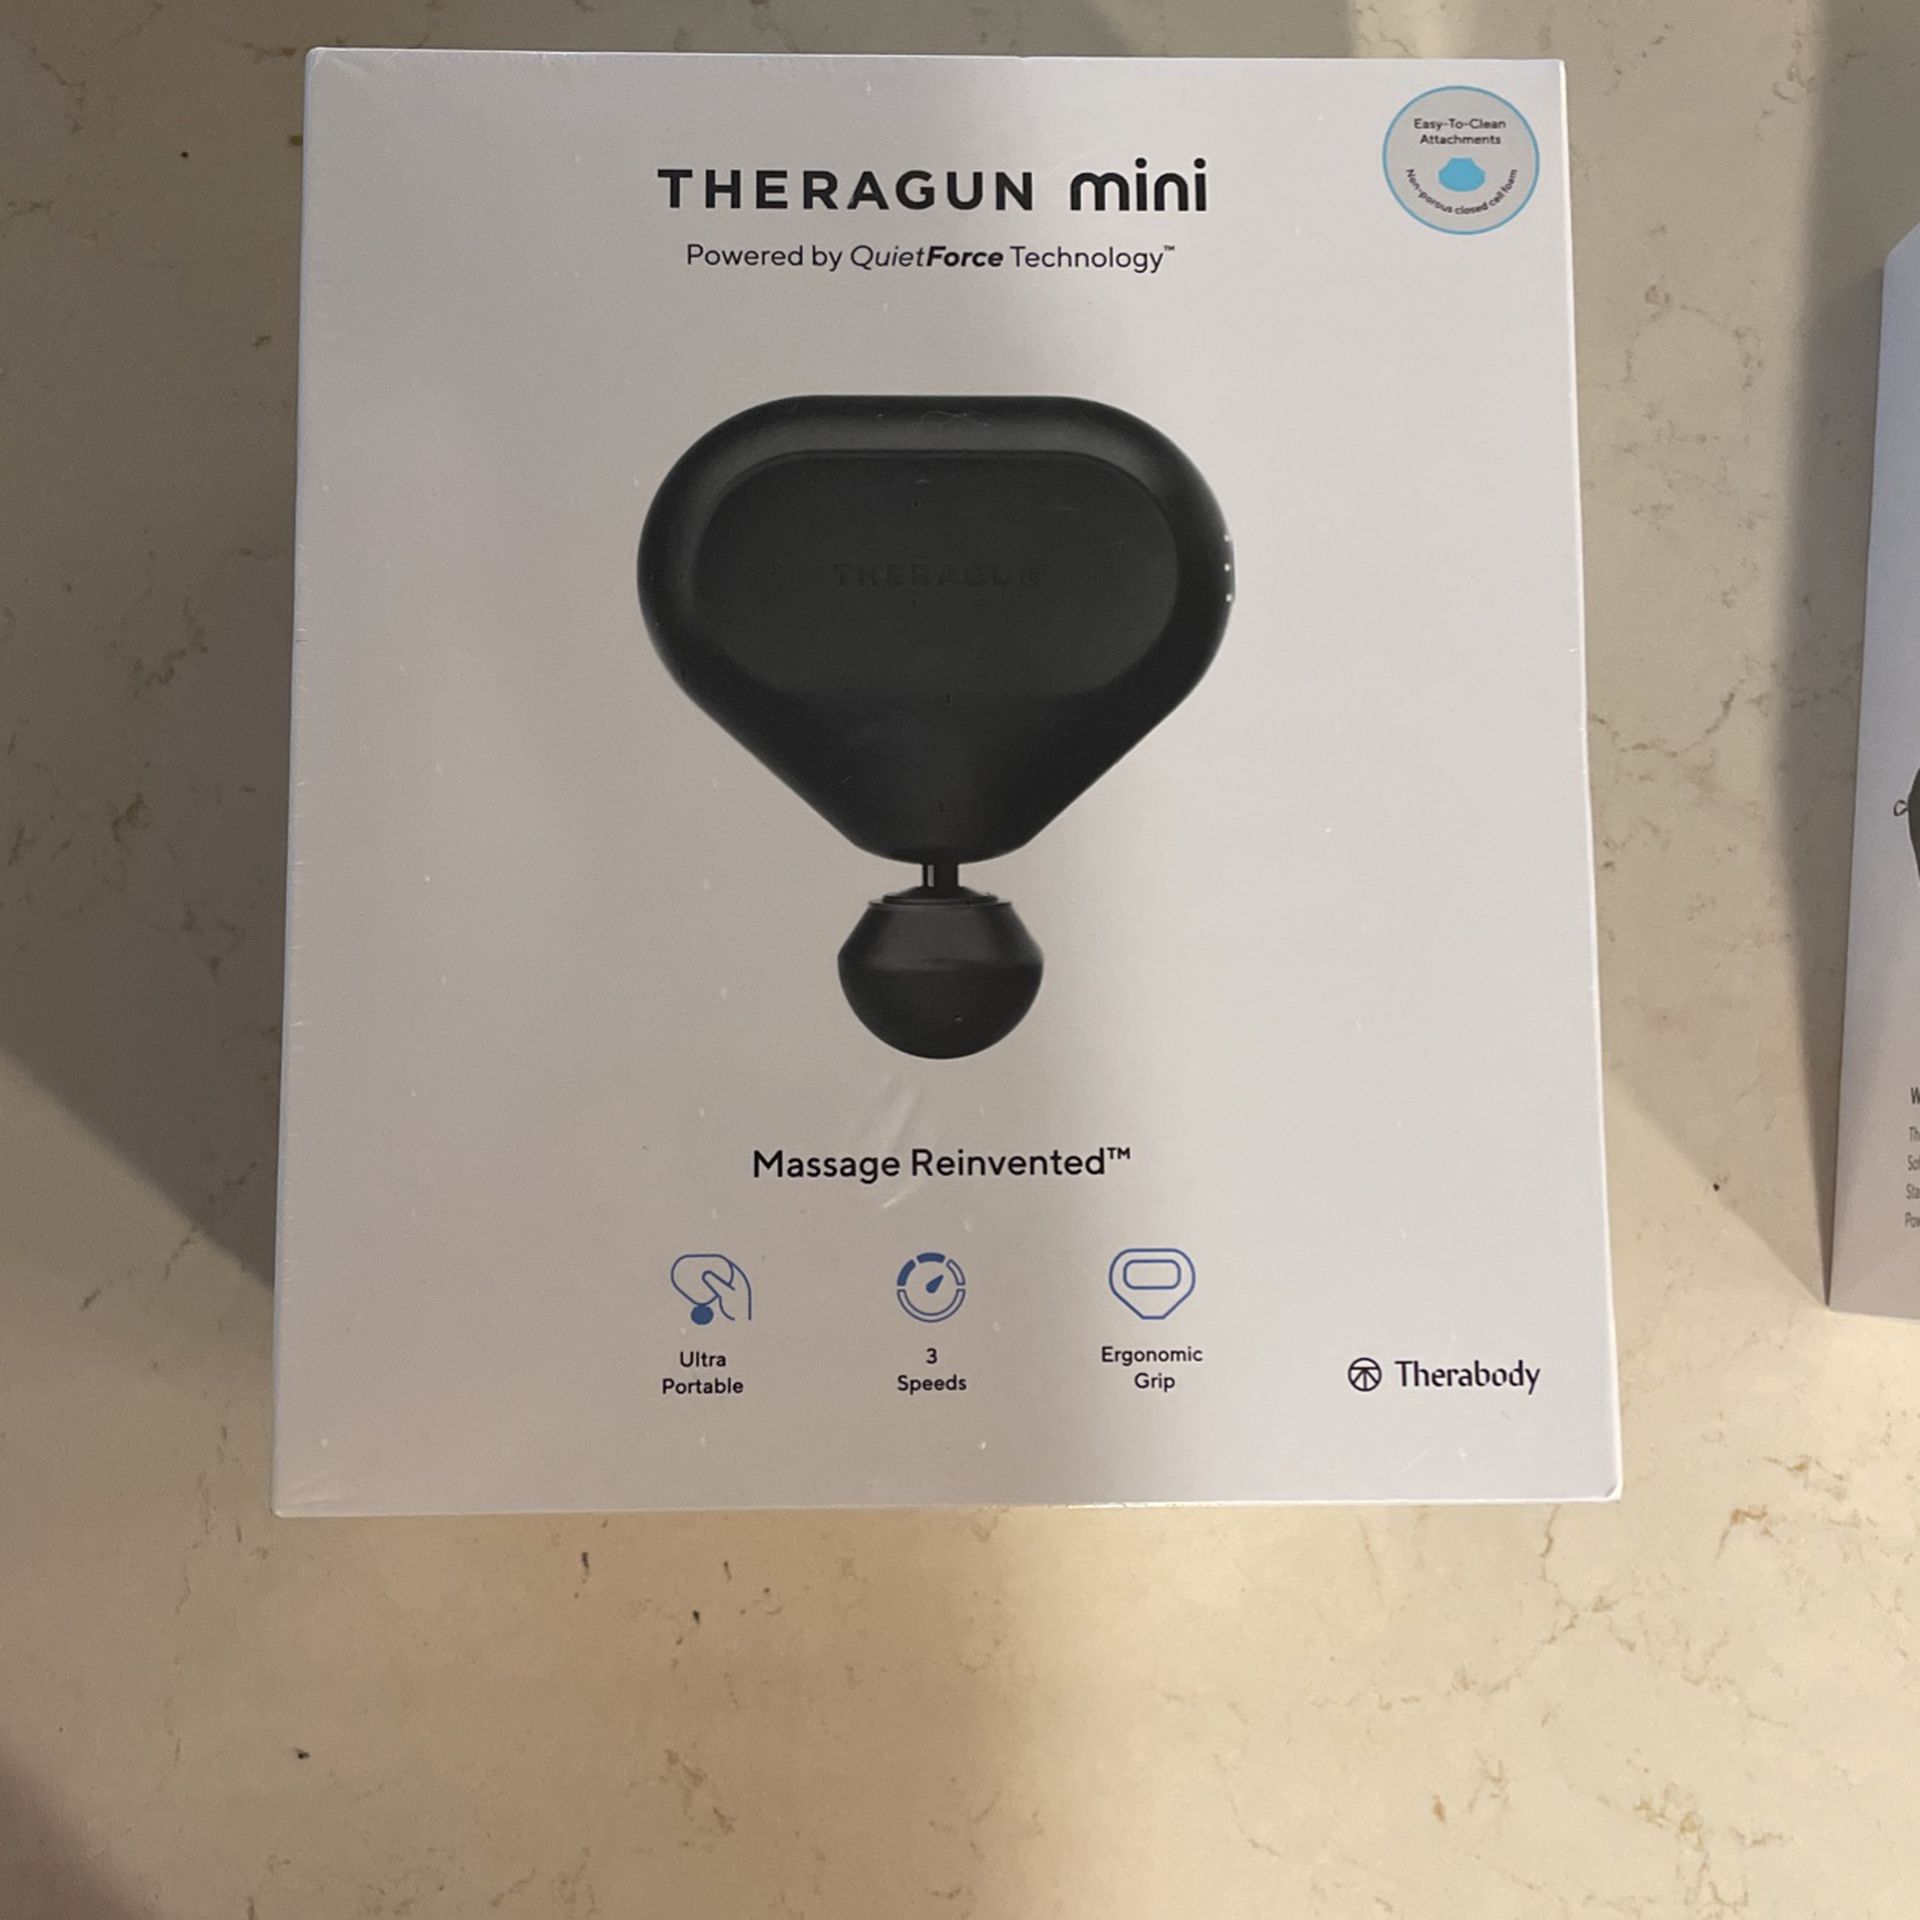 #1 TheraGun Mini Up For Grabs 